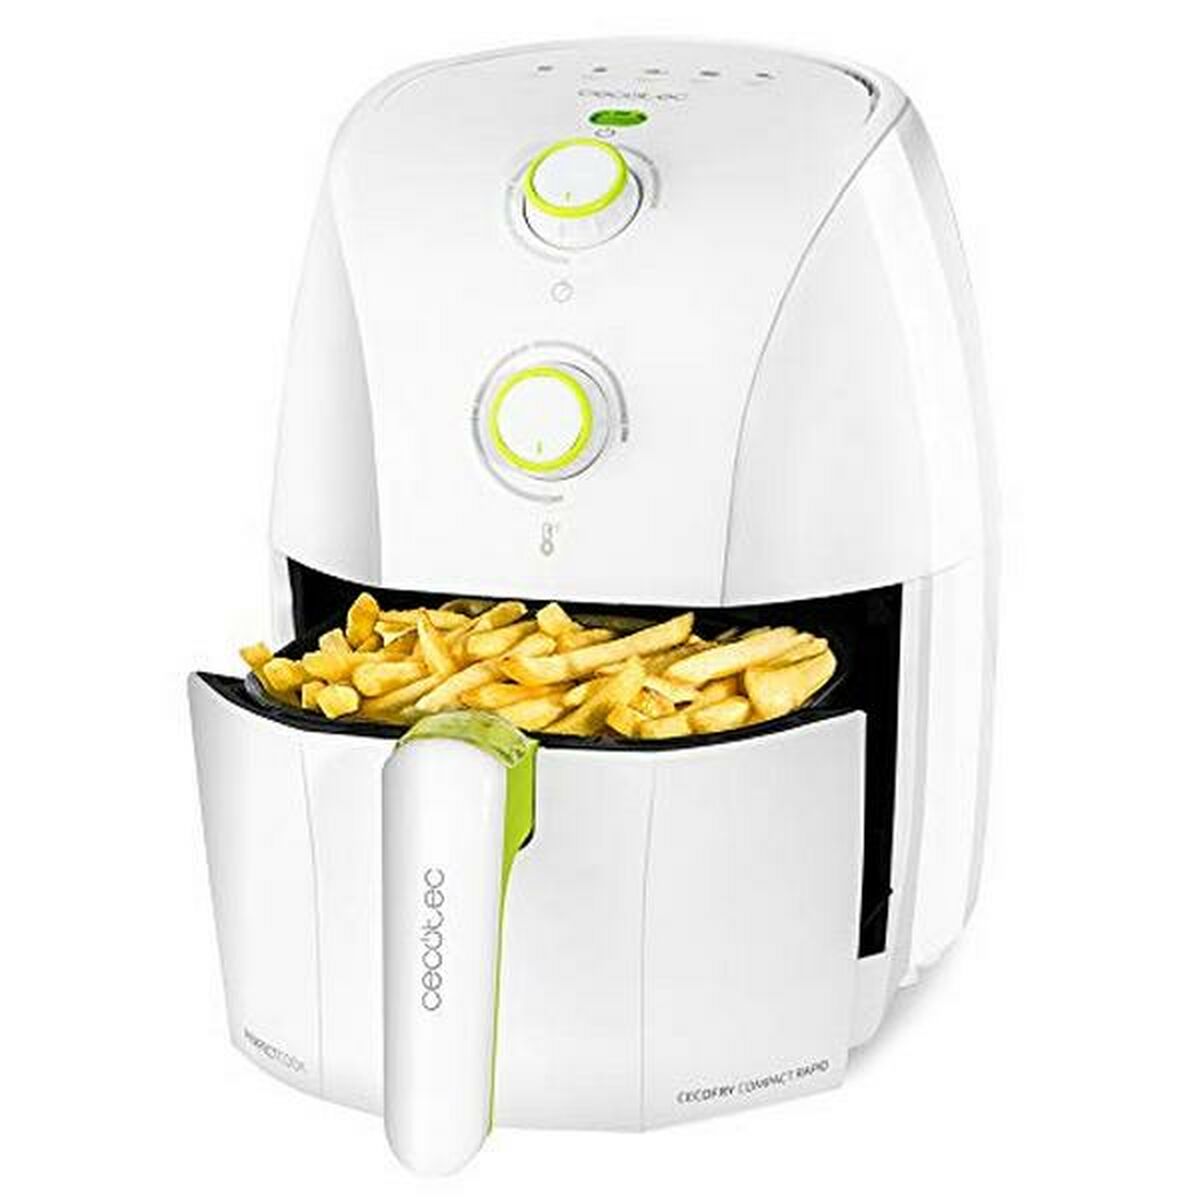 Luchtfriteuse Cecotec Cecofry Compact Rapid (1,5 L) 900 W